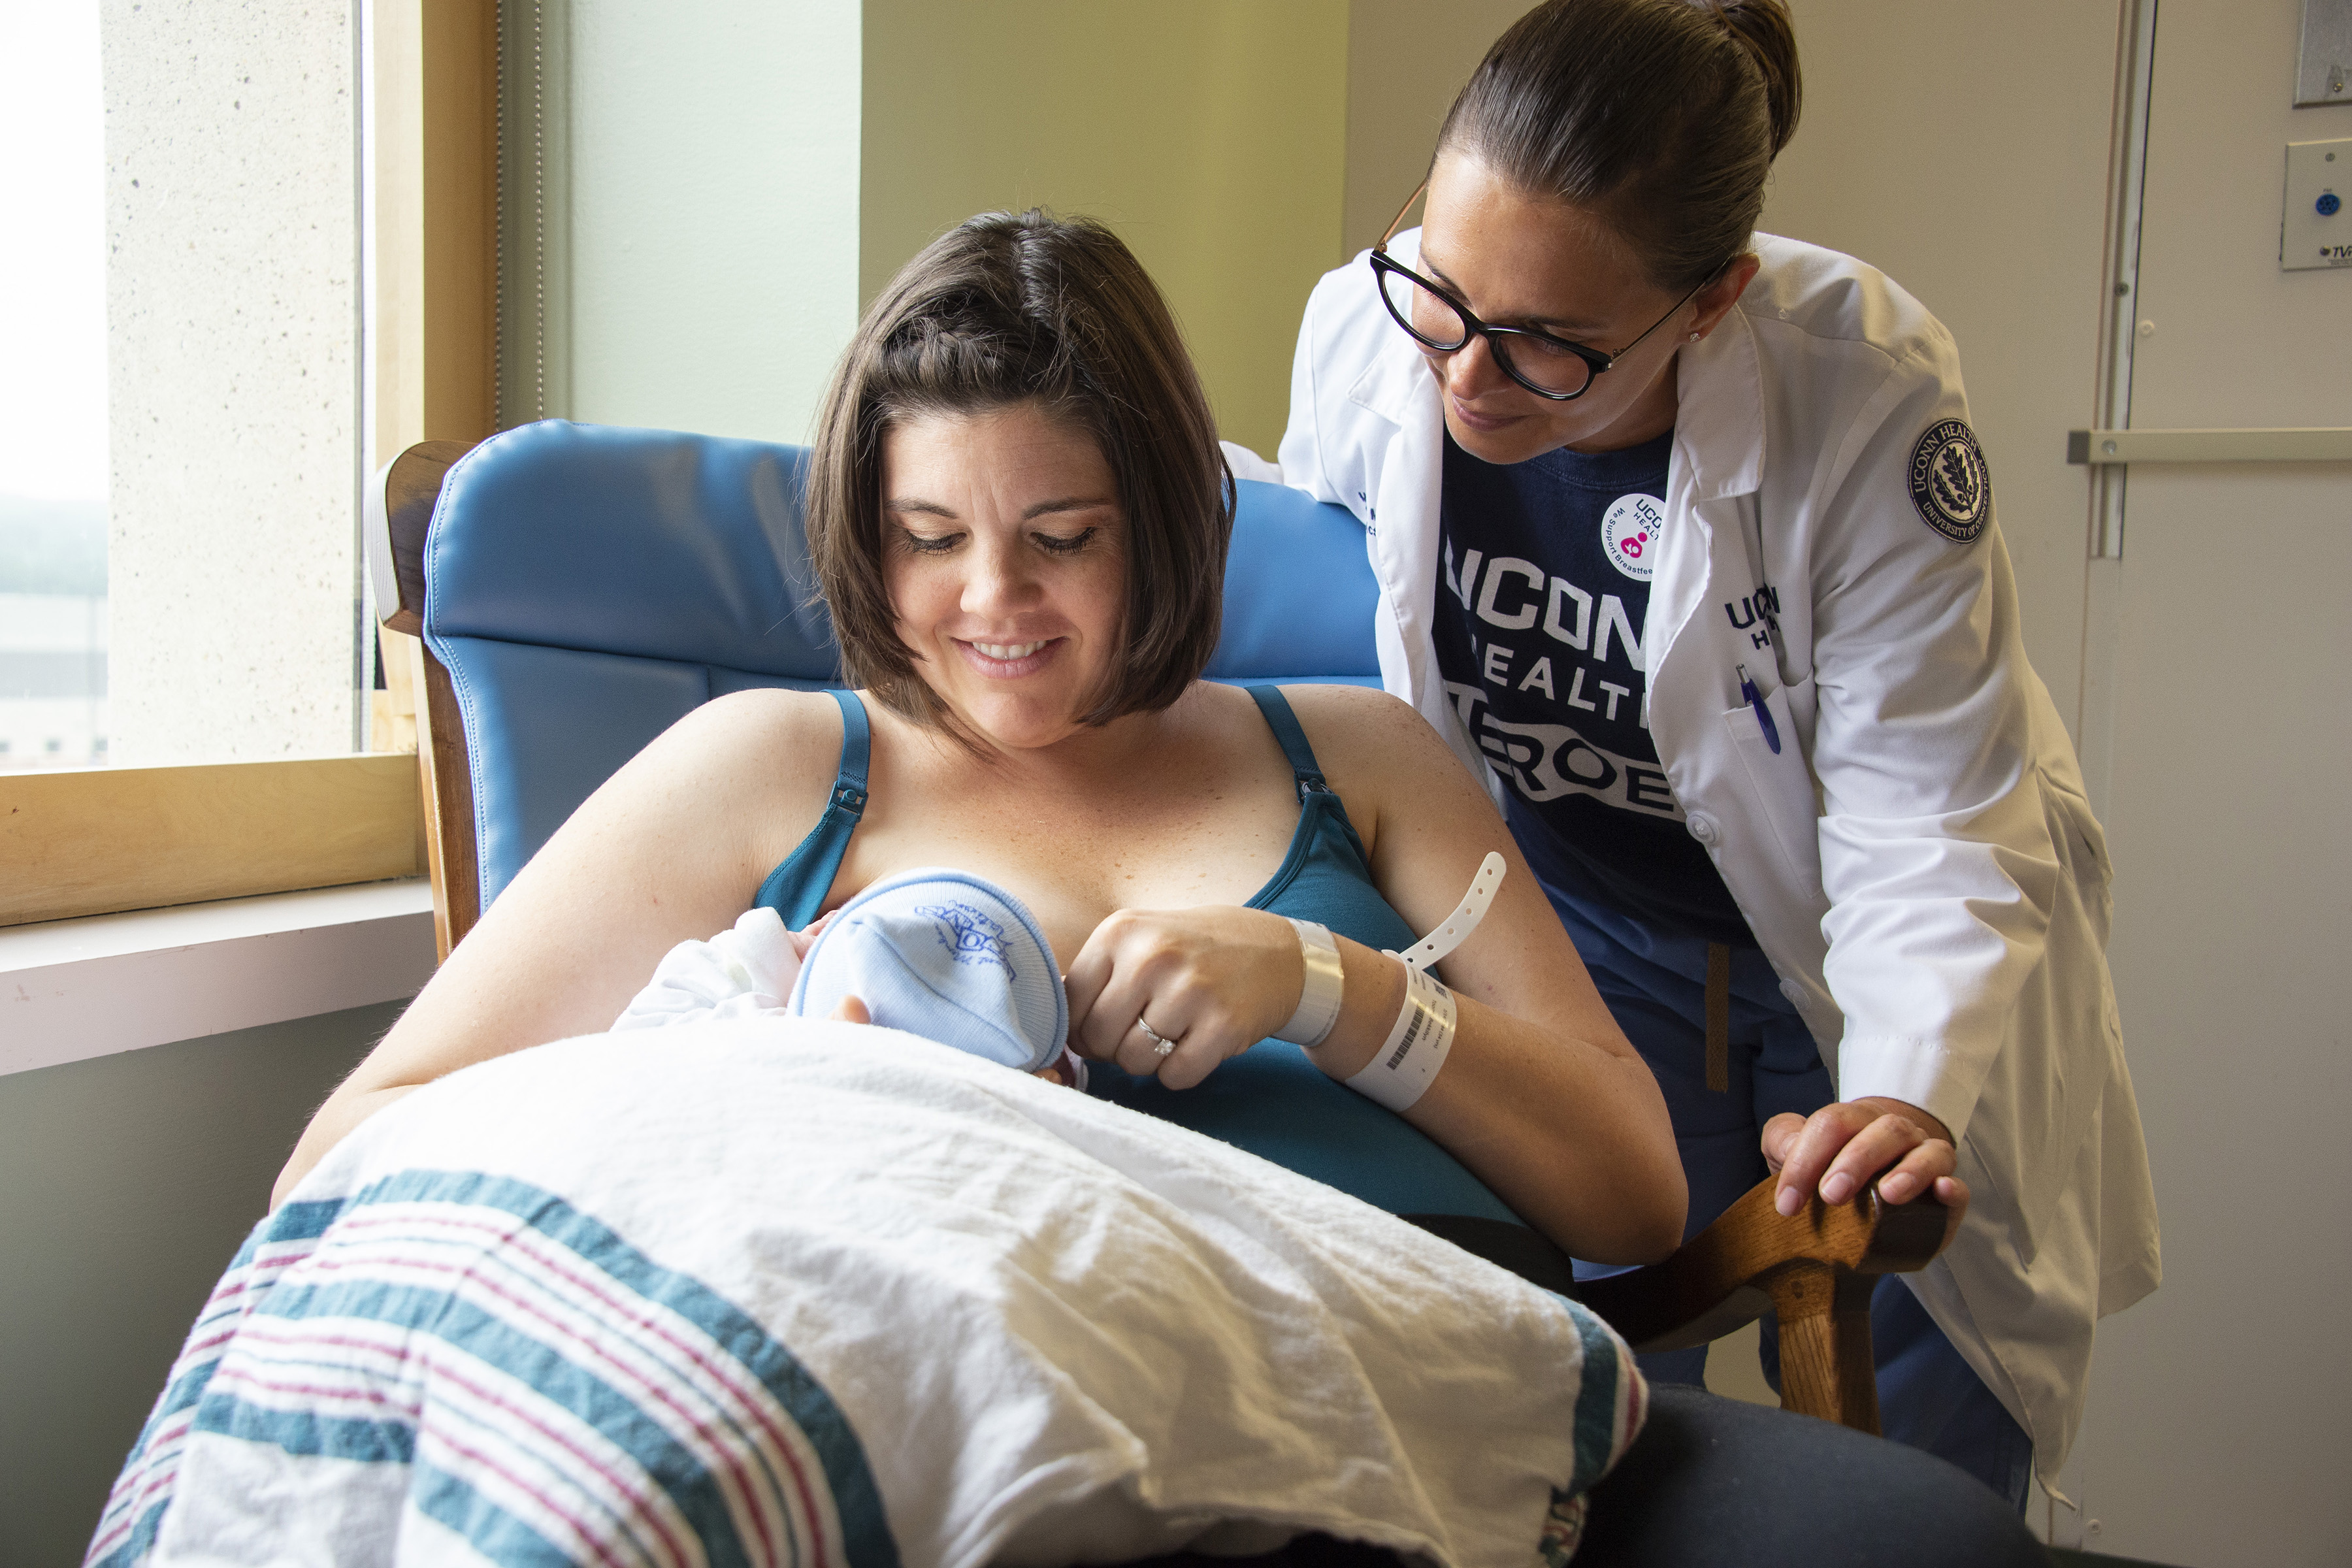 Lactation consultant Marisa Merlo helps maternity patient Bekkilyn Toone breastfeed her newborn son in UConn Health's labor and delivery unit. (Kristin Wallace/UConn Health Photo)